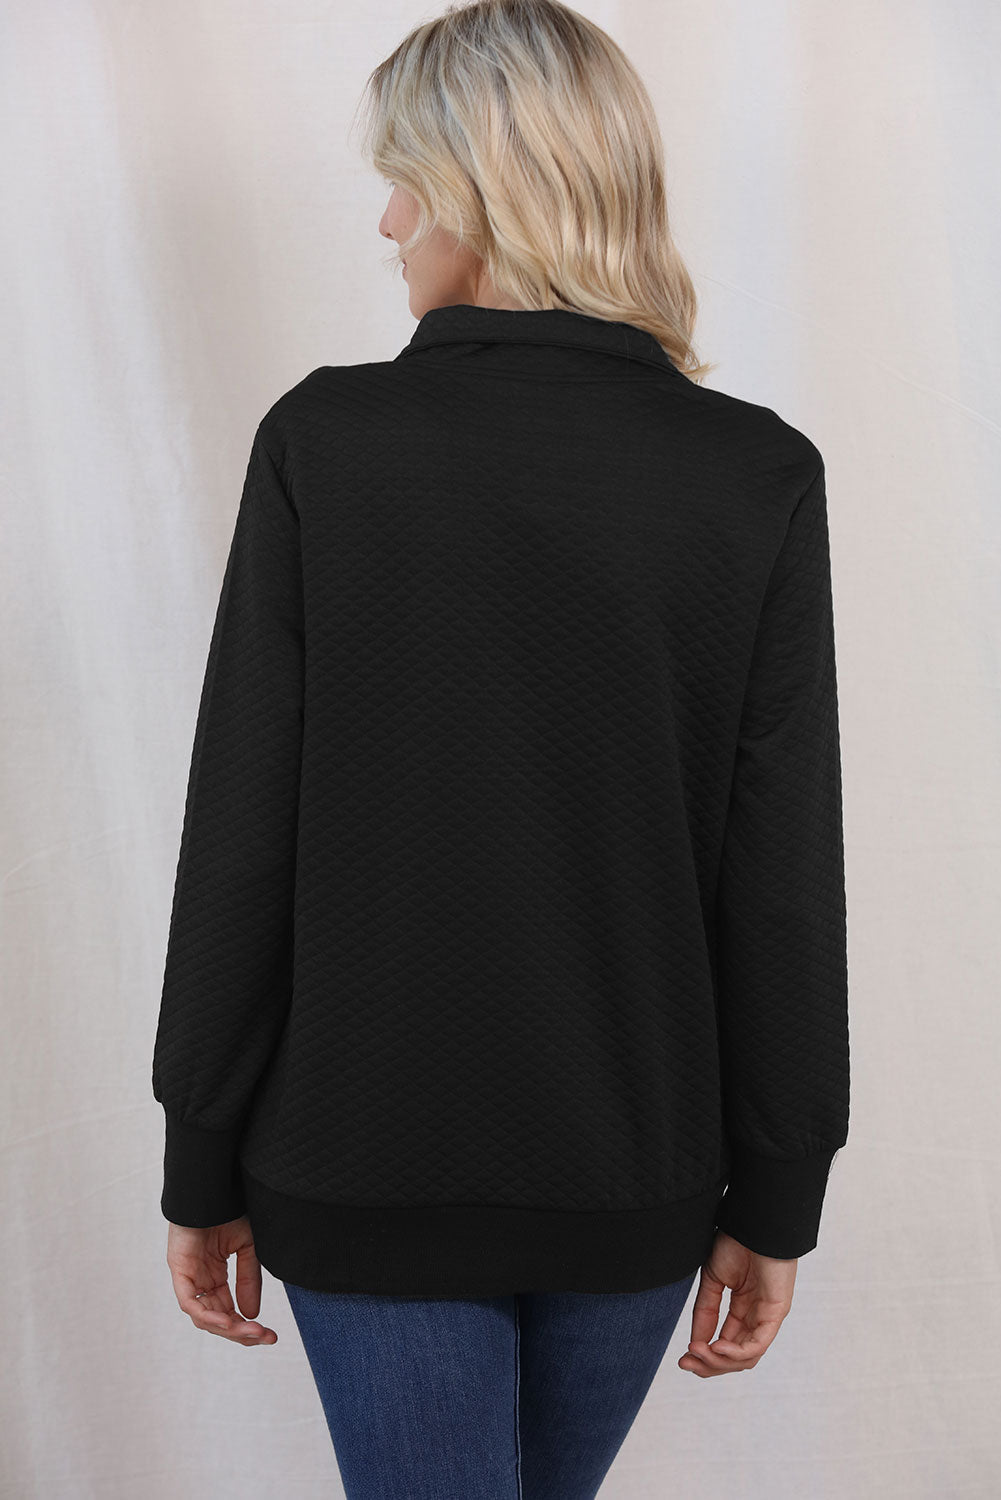 Collared Neck Long Sleeve Top - Women’s Clothing & Accessories - Shirts & Tops - 9 - 2024